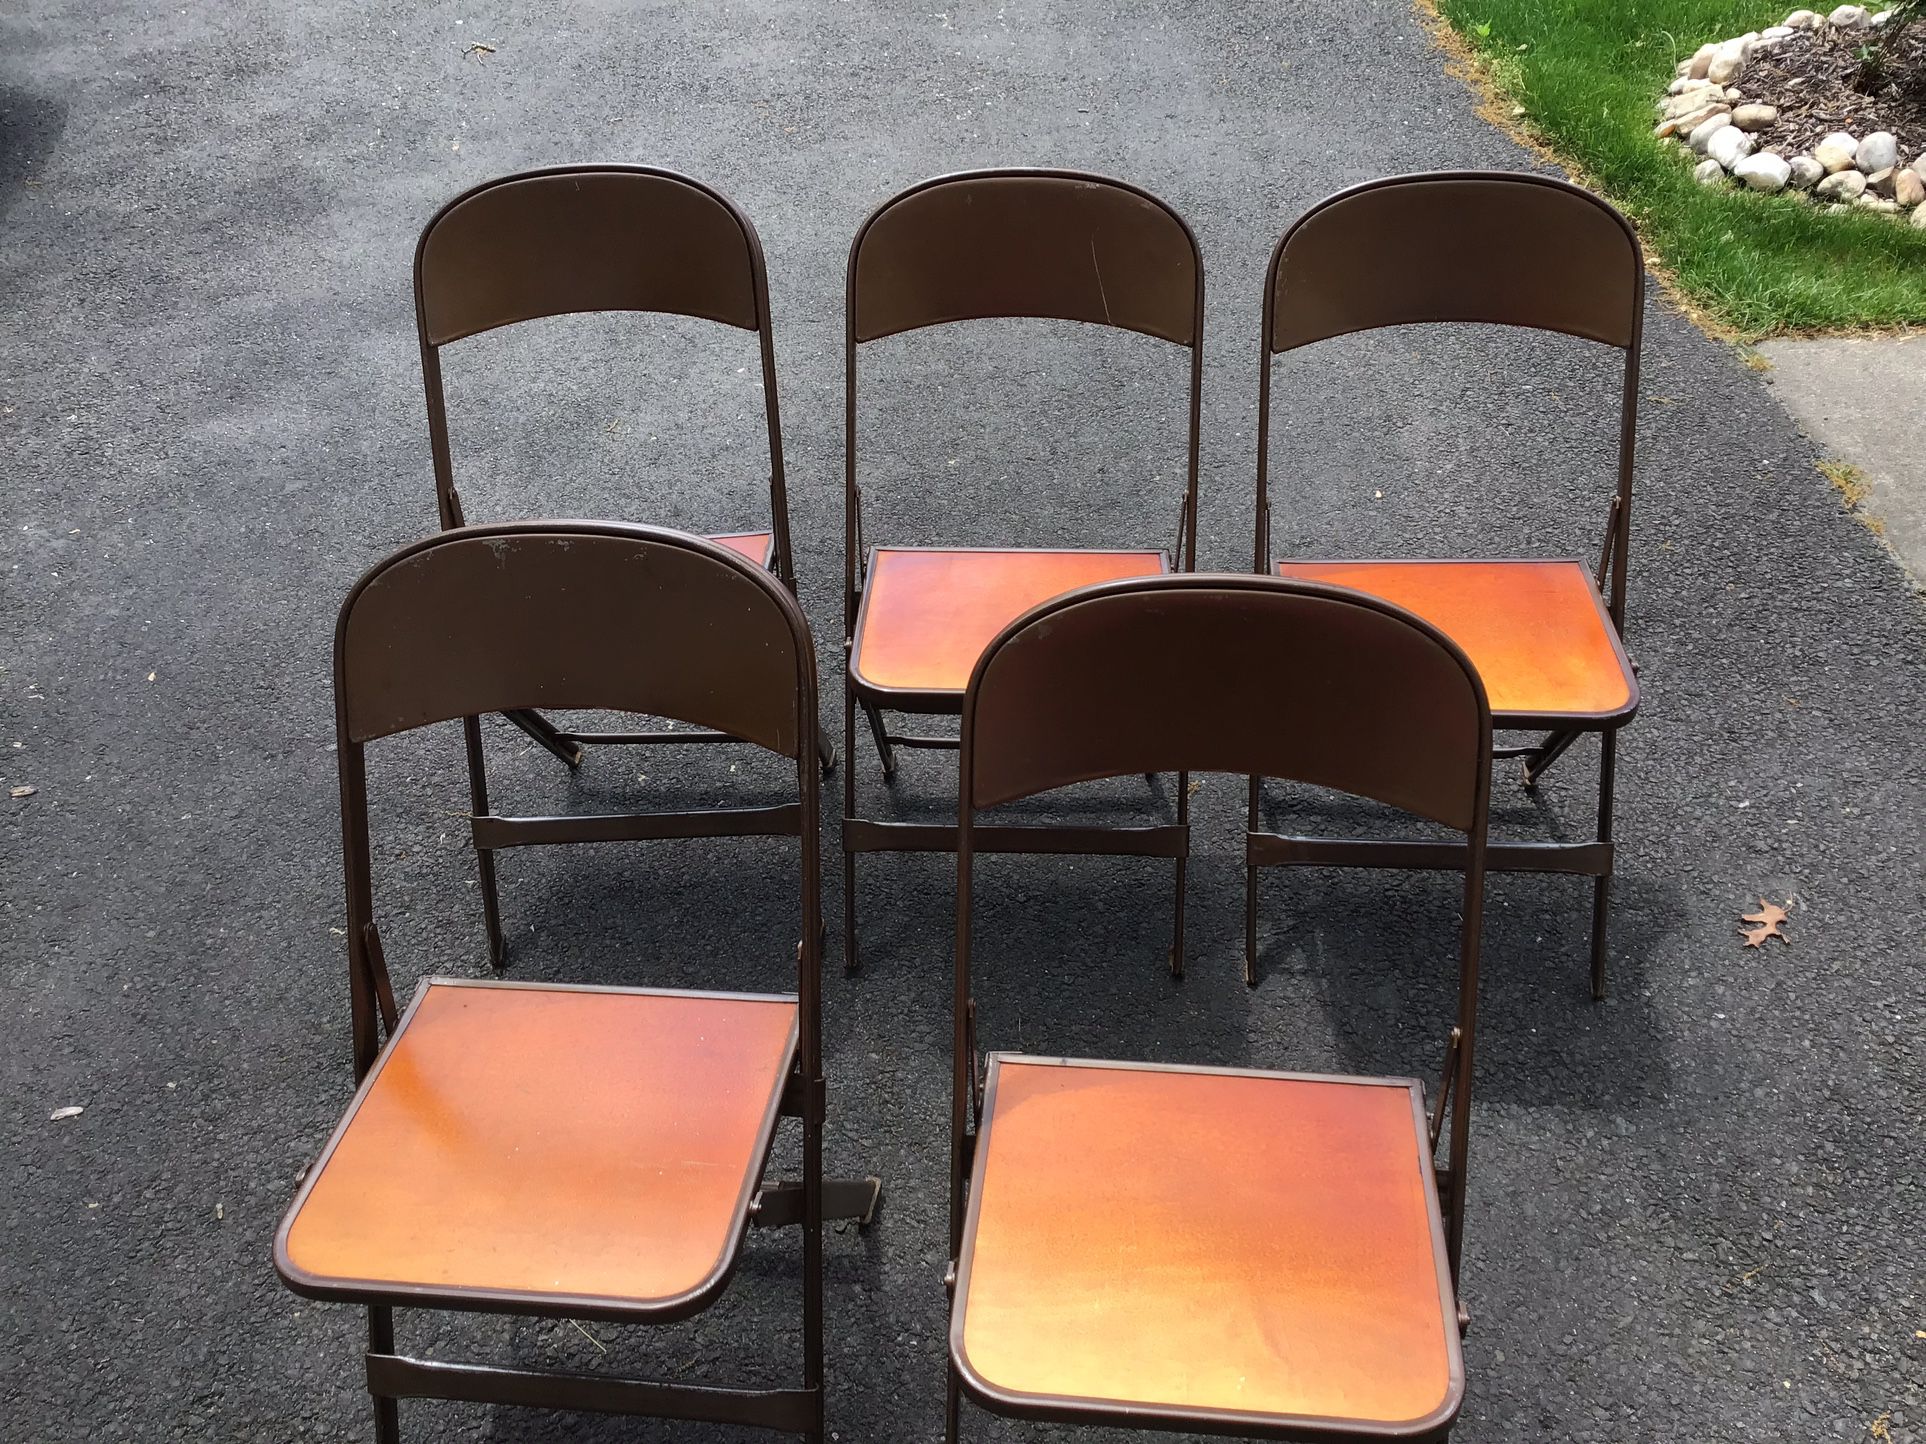 Set of 5 Vintage Industrial Clarin Mfg. Metal Folding Chairs w 